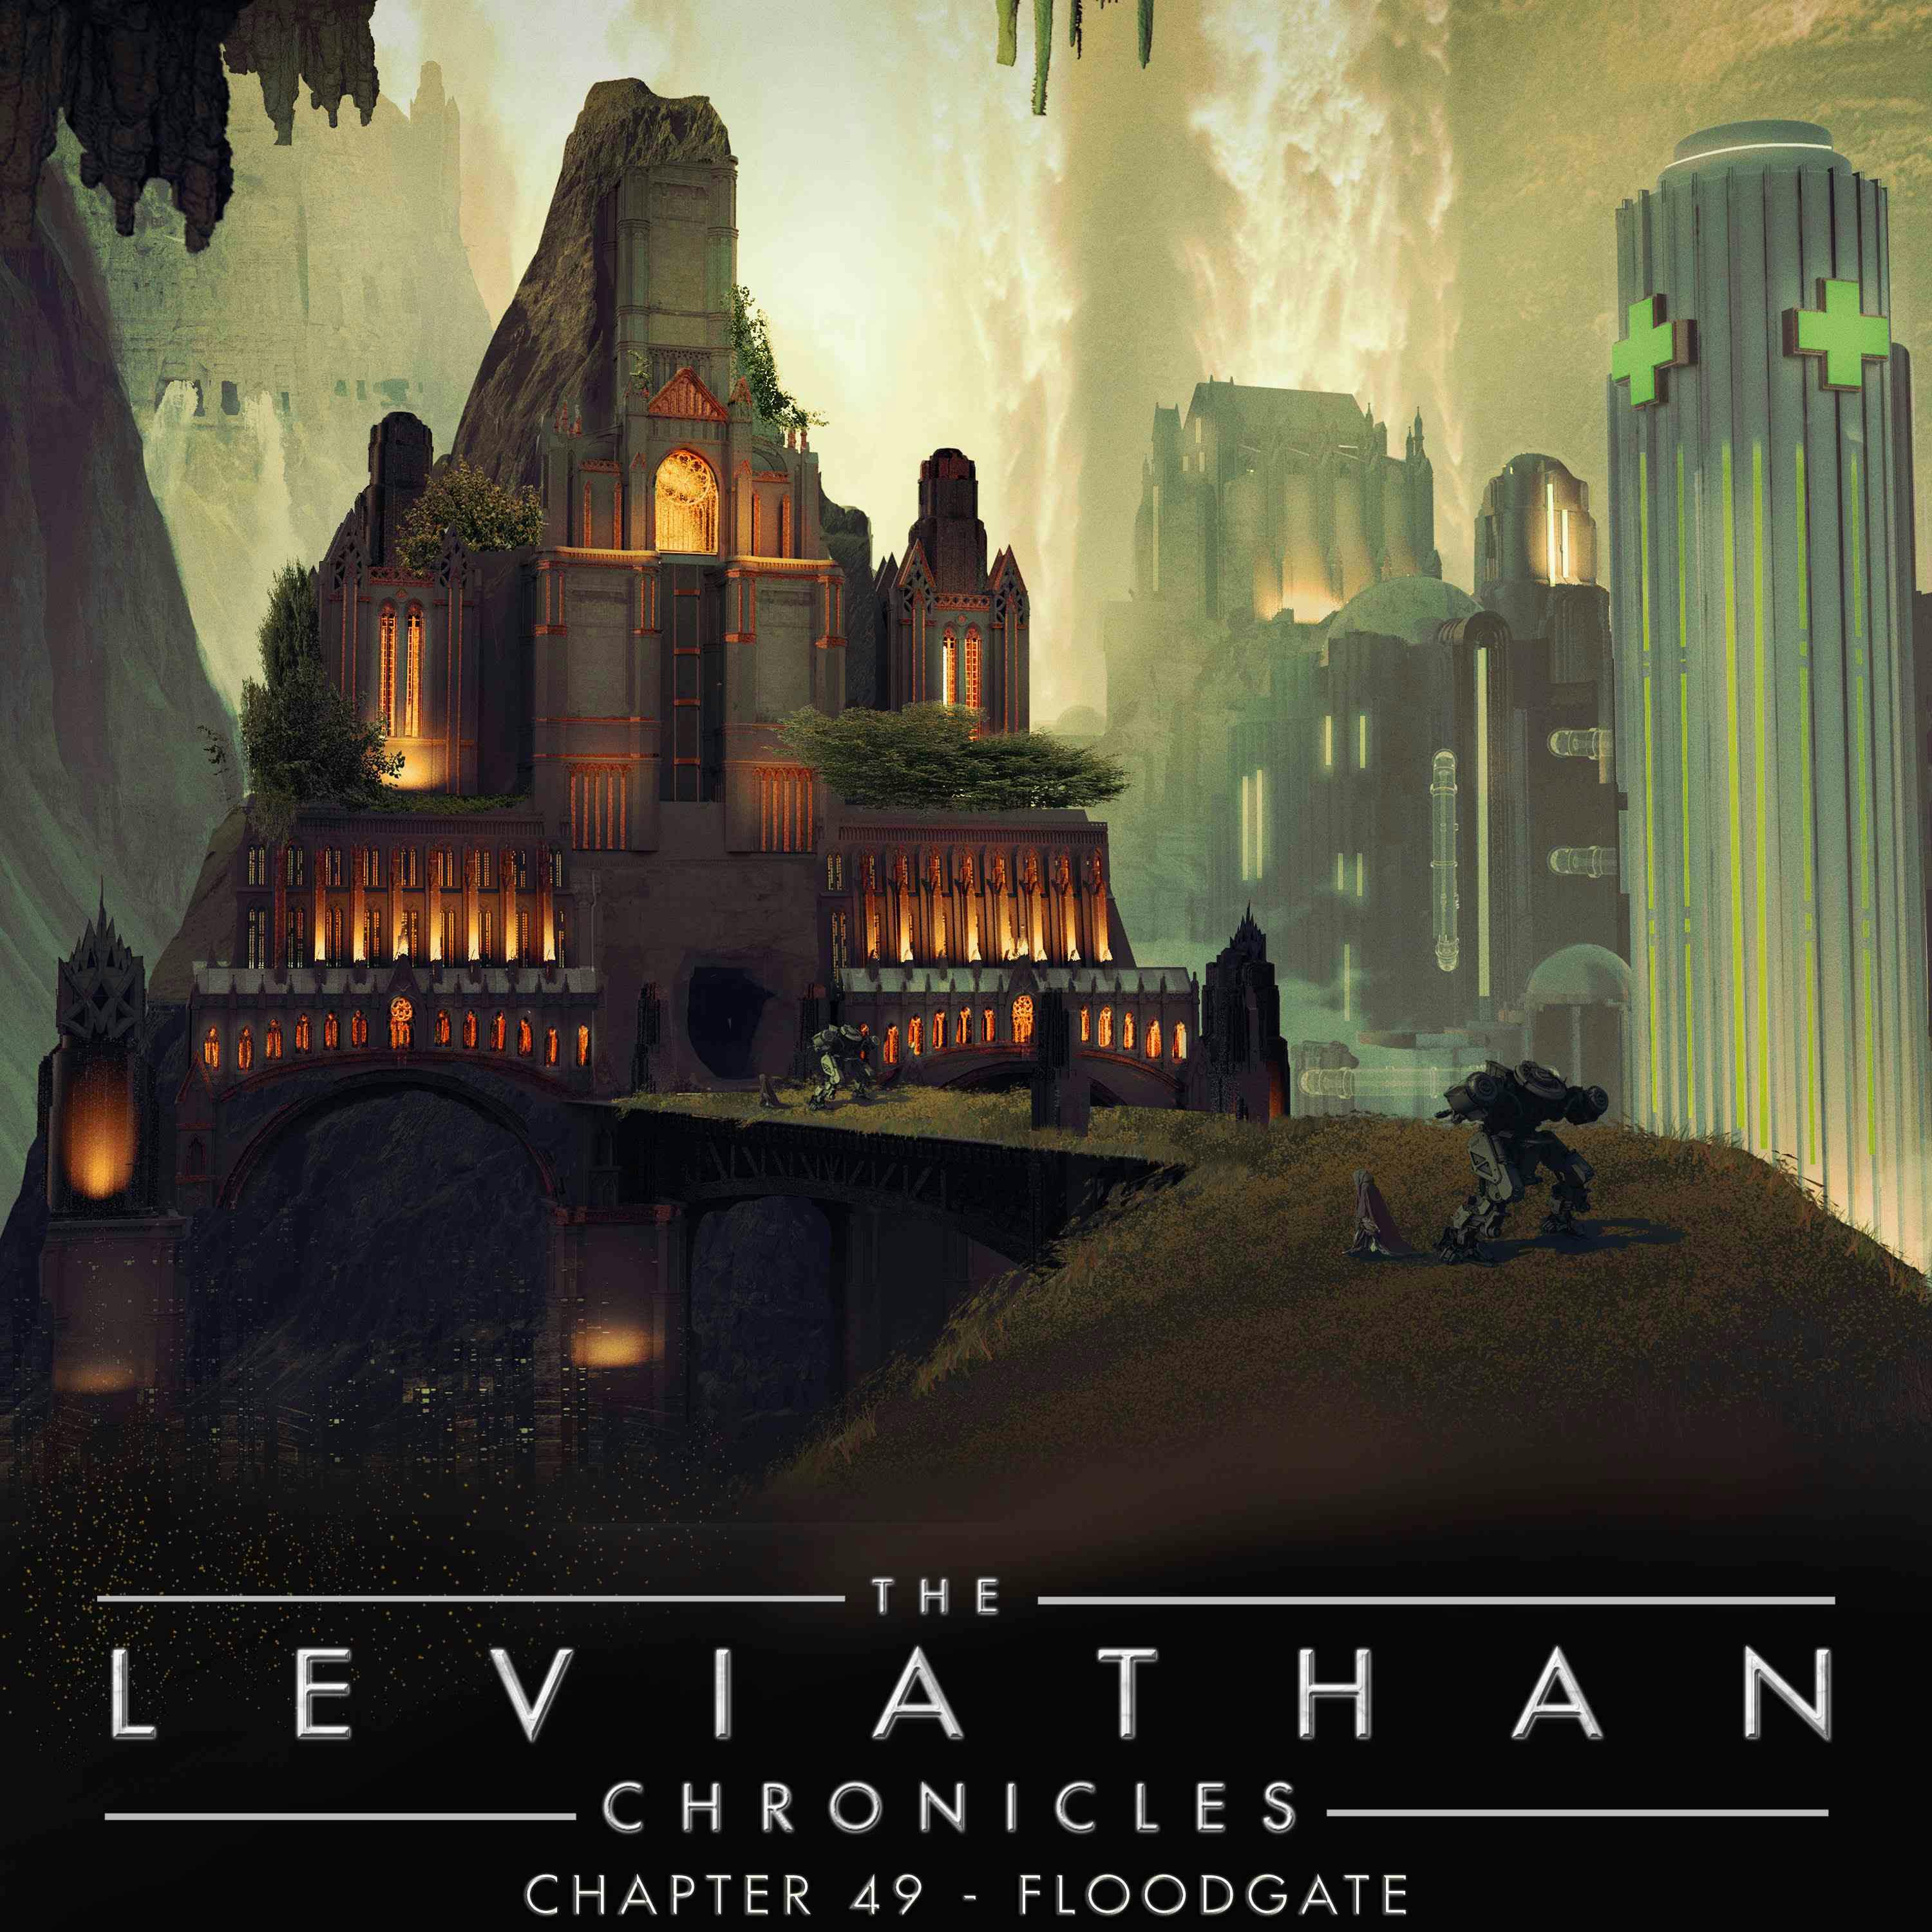 The Leviathan Chronicles | Chapter 49 - Floodgate